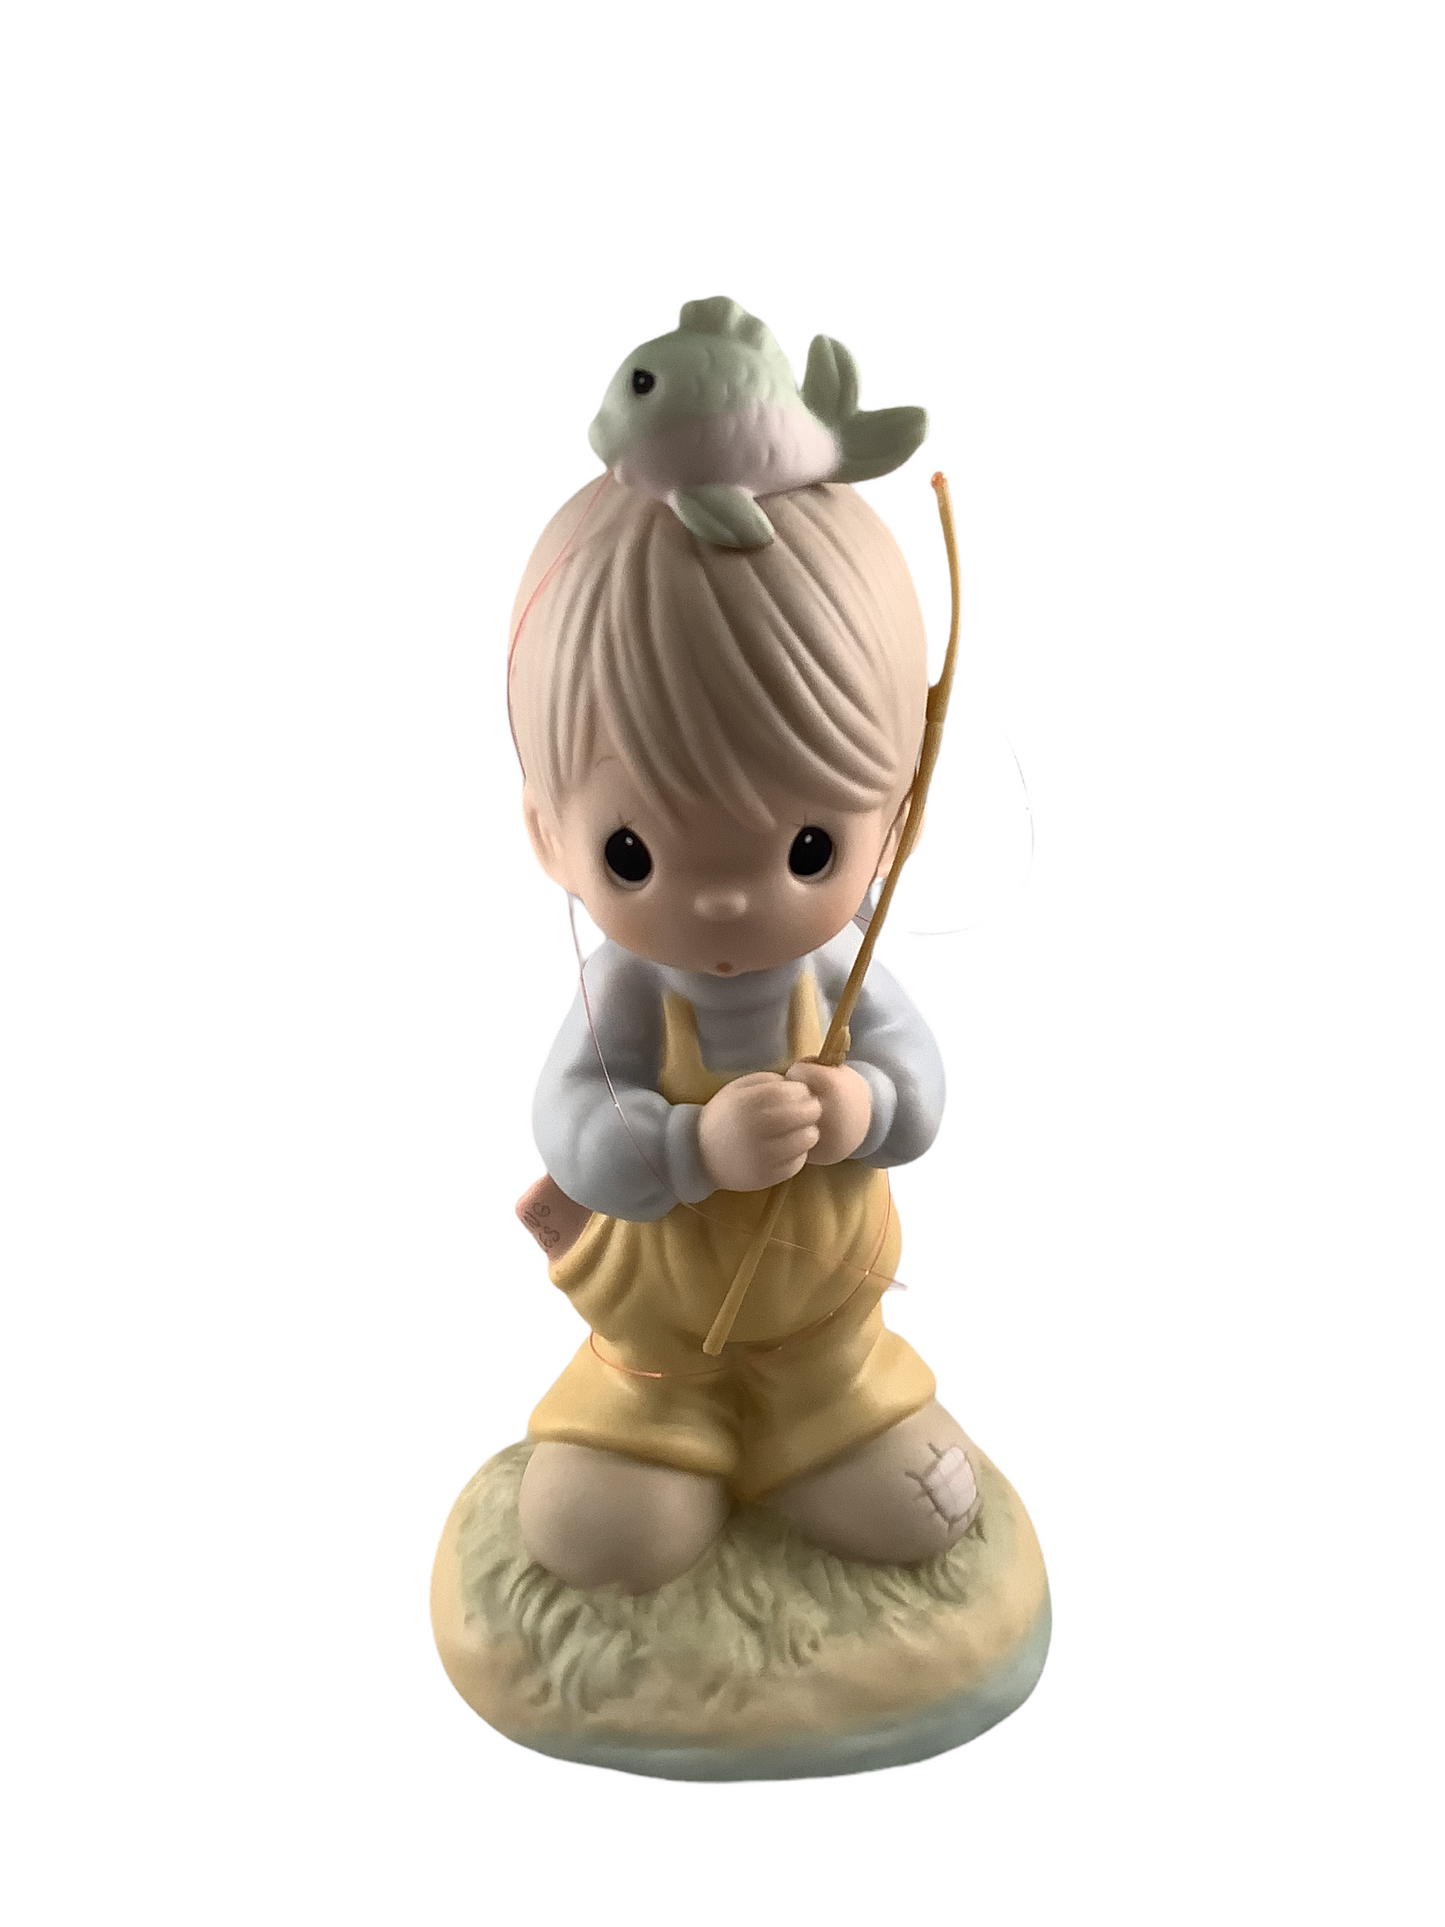 Caught Up In Sweet Thoughts Of You - Precious Moment Figurine